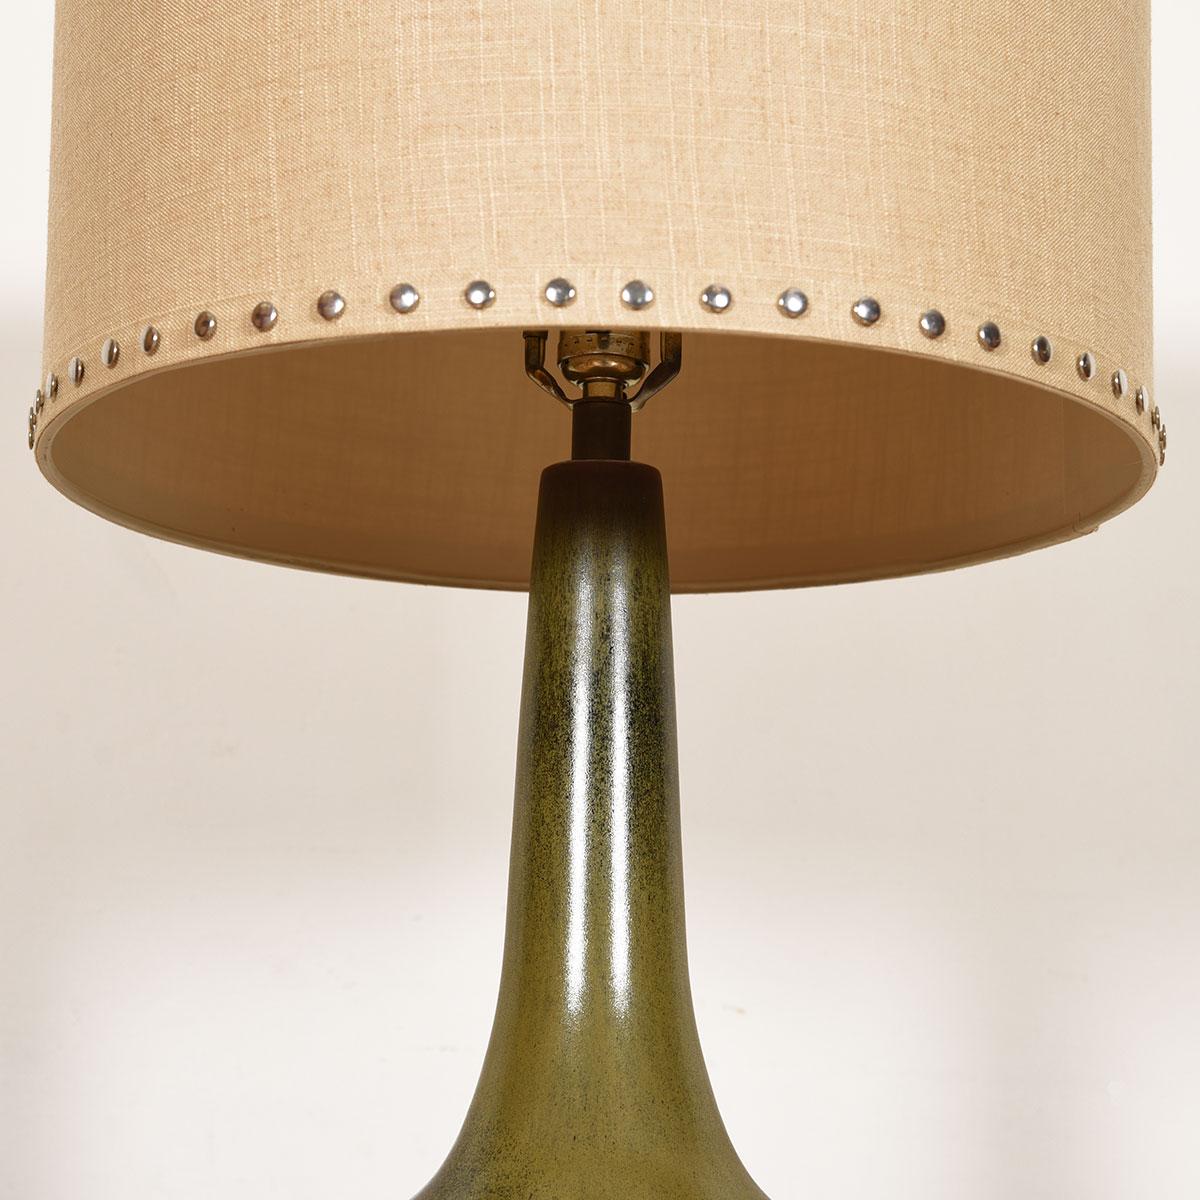 Ceramic Midcentury Table Lamp by Bostlund In Excellent Condition For Sale In Kensington, MD